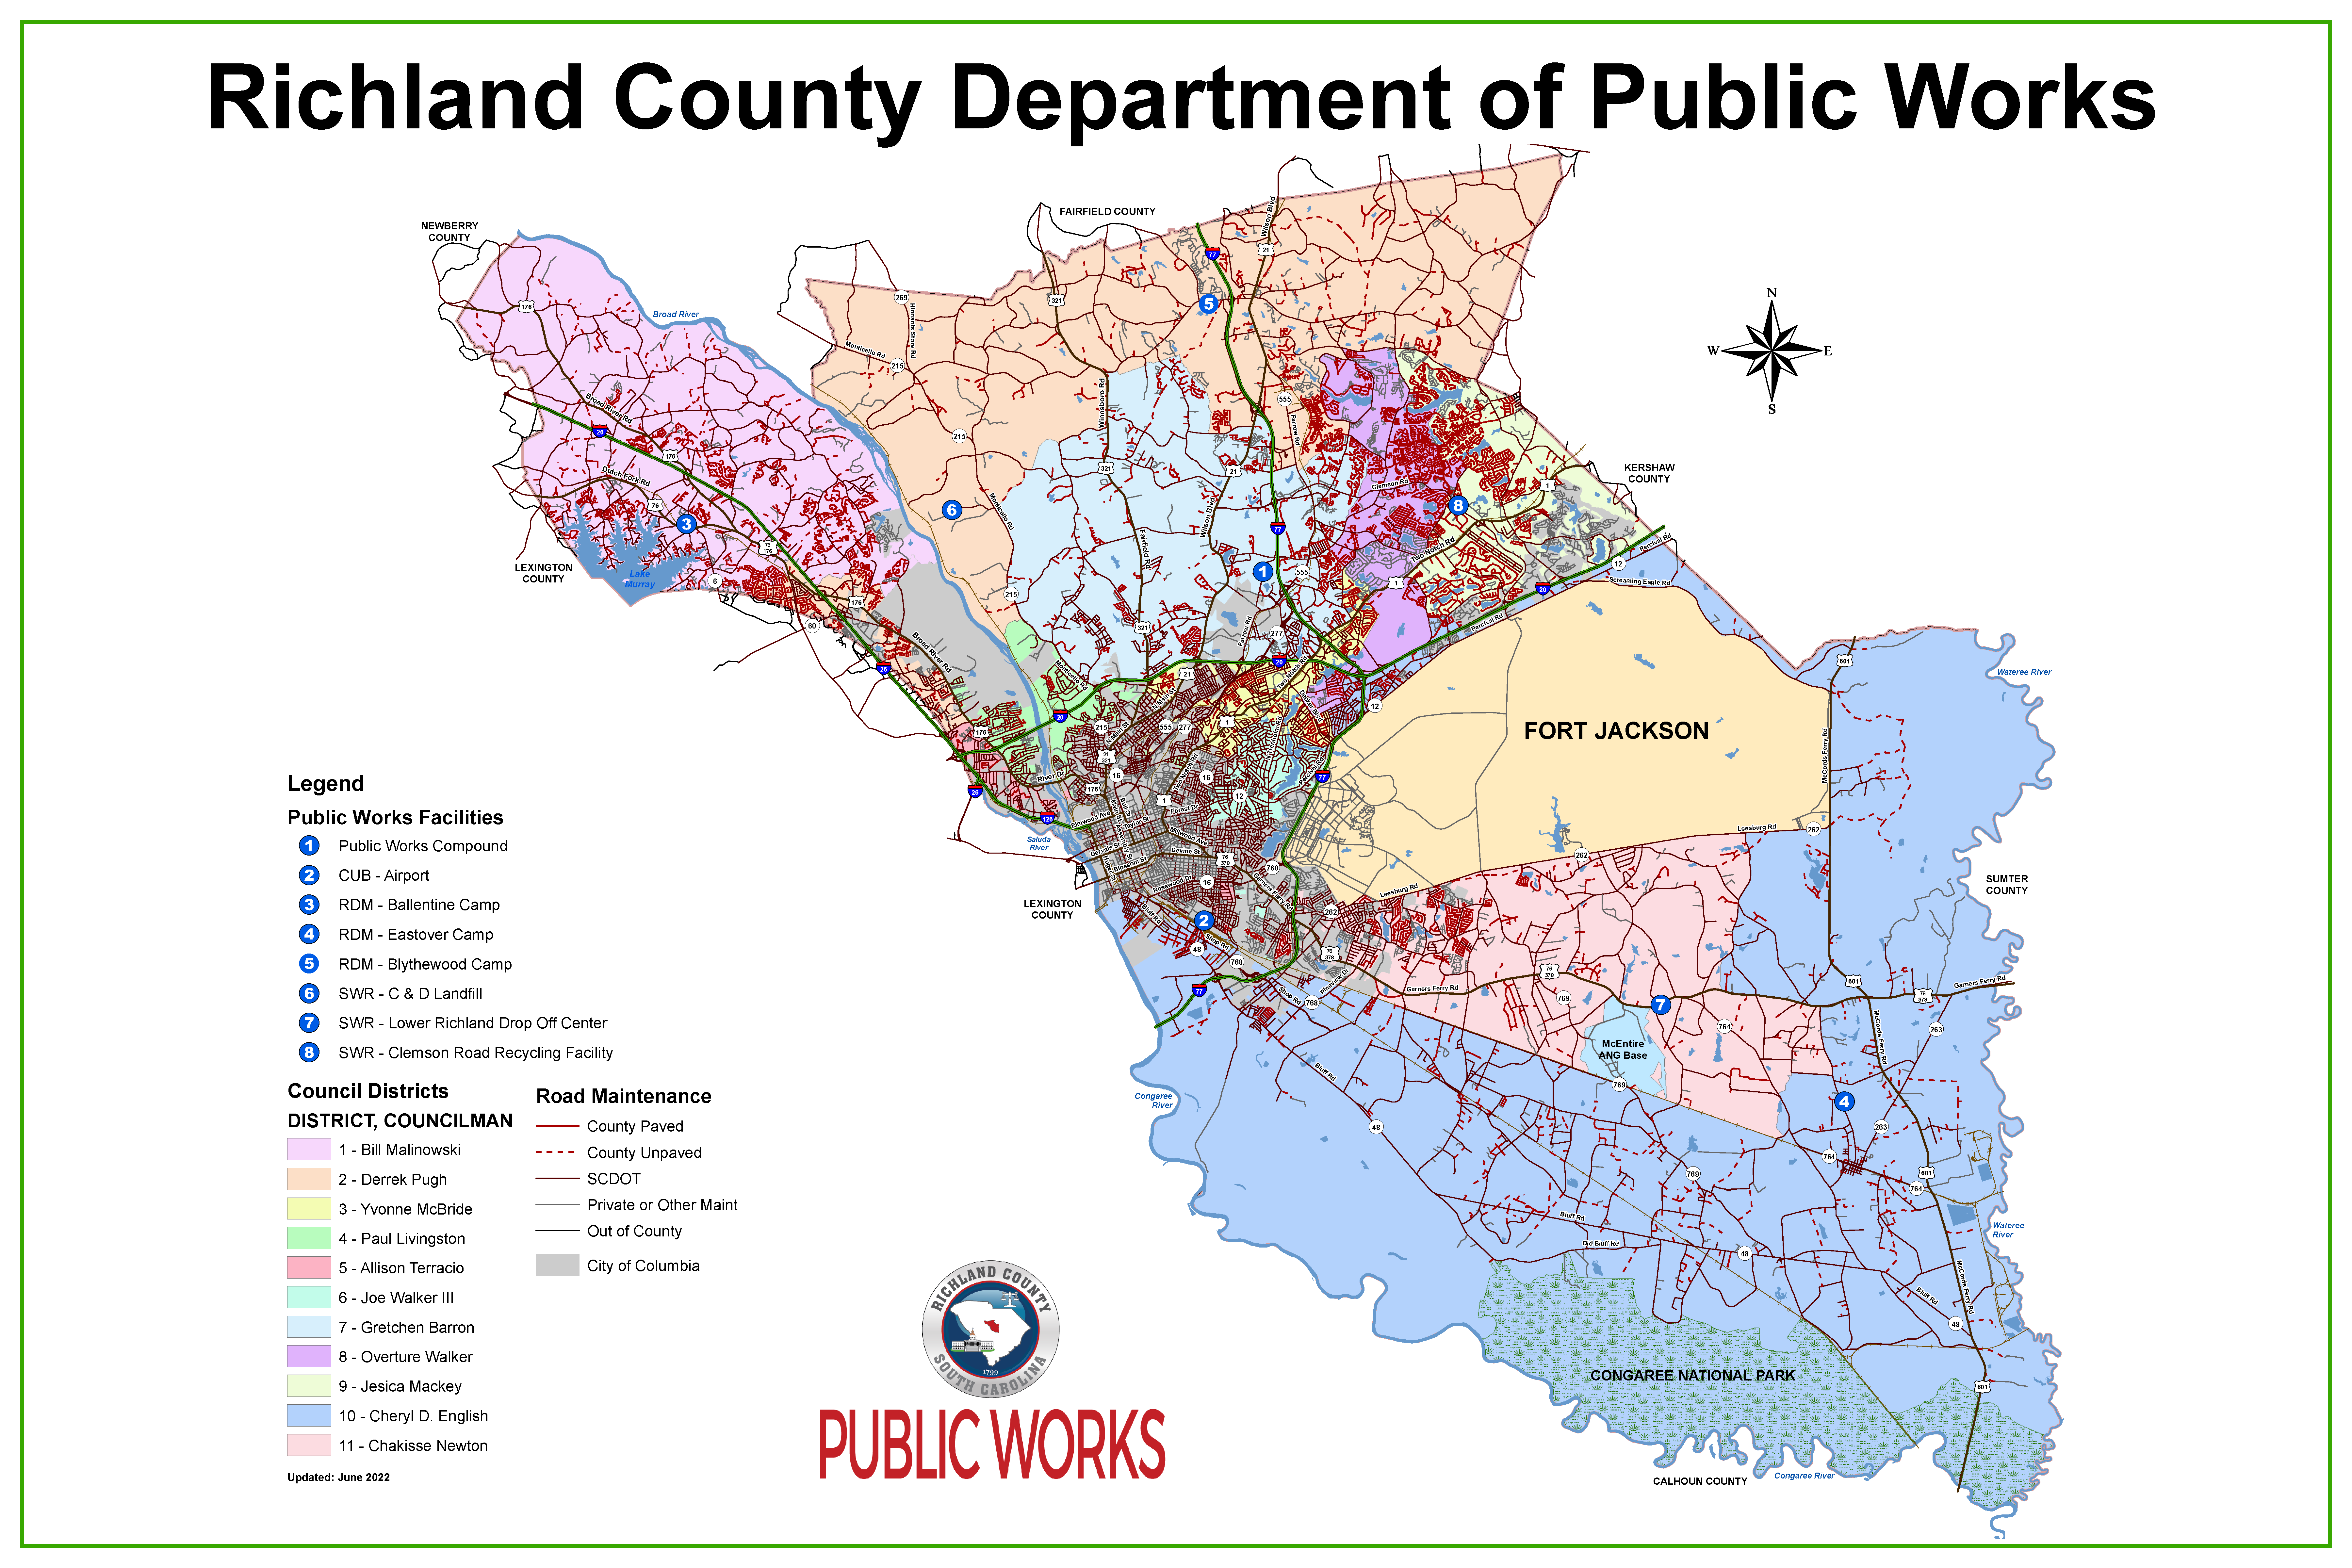 Richland County Department of Public Works Image of Map